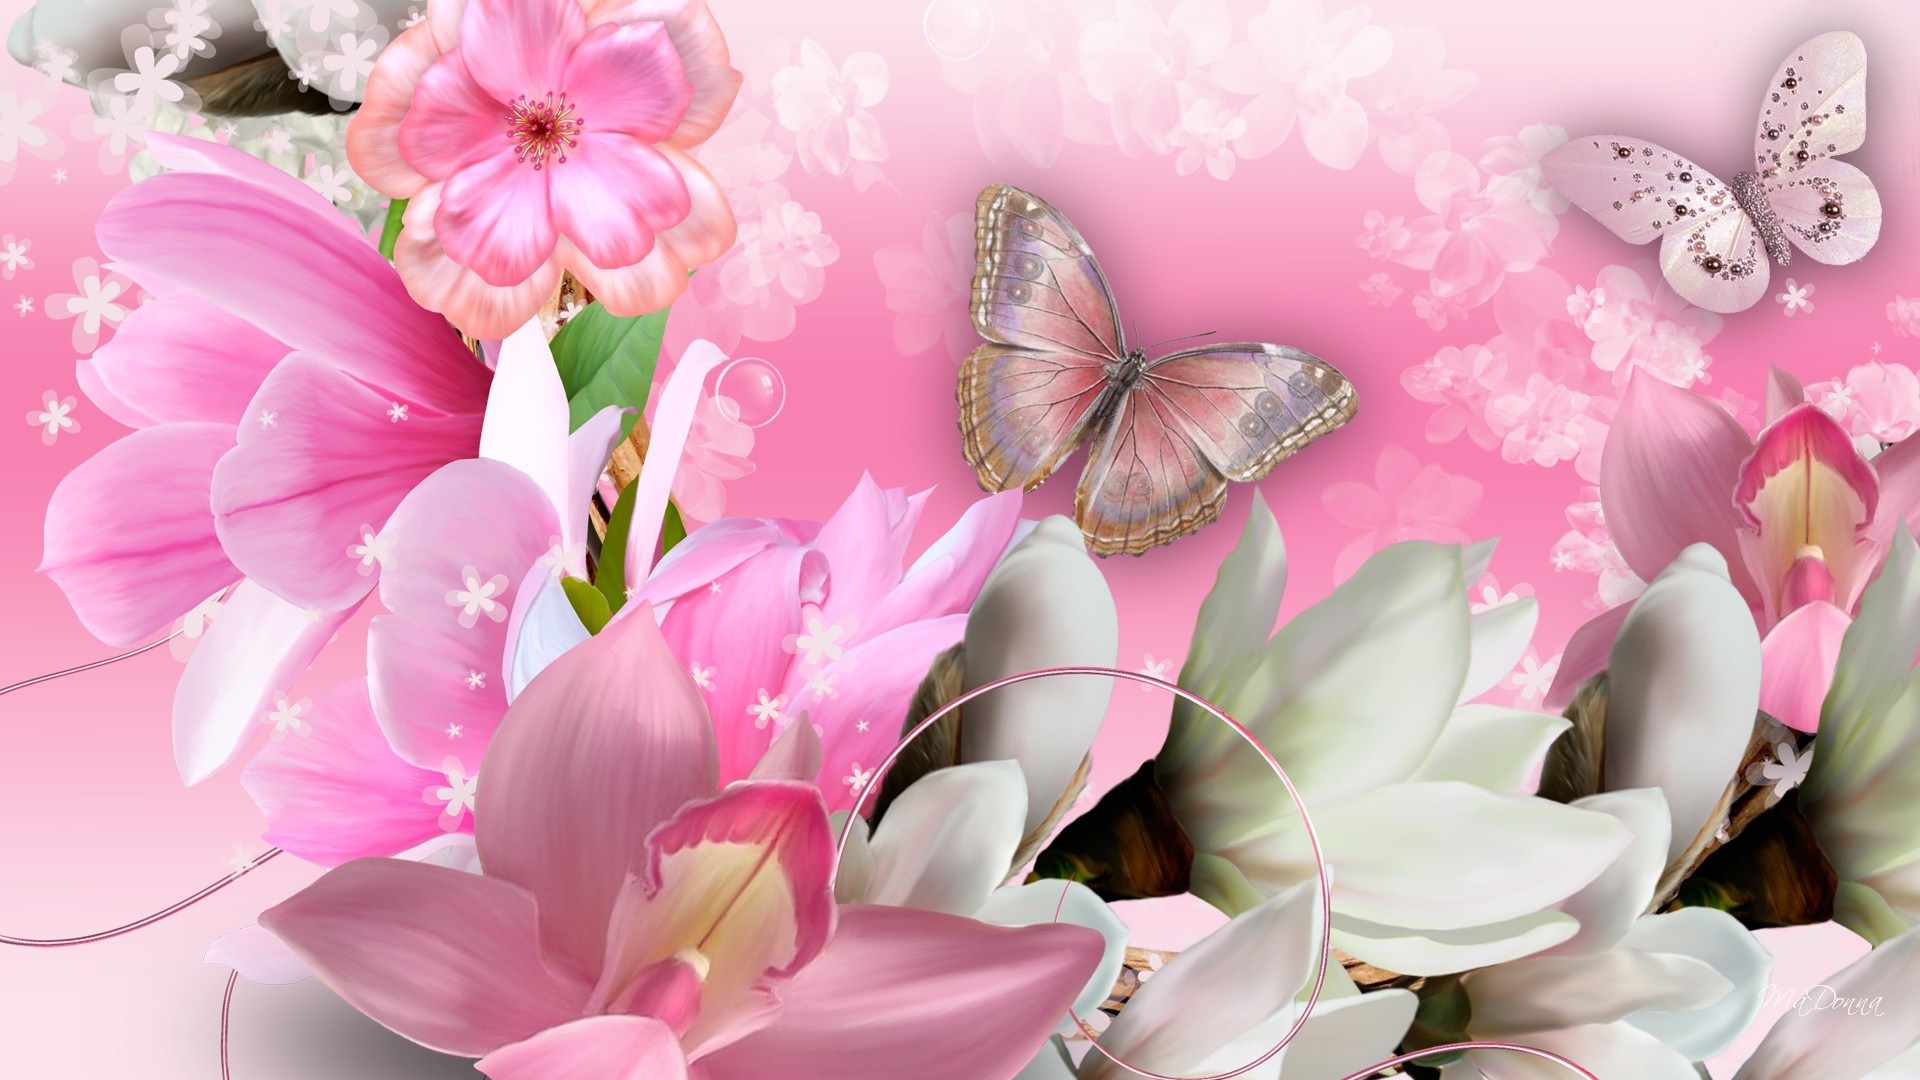 Wallpaper Butterfly, orchids, flowers, collage, creative design 1920x1080 Full HD 2K Picture, Image